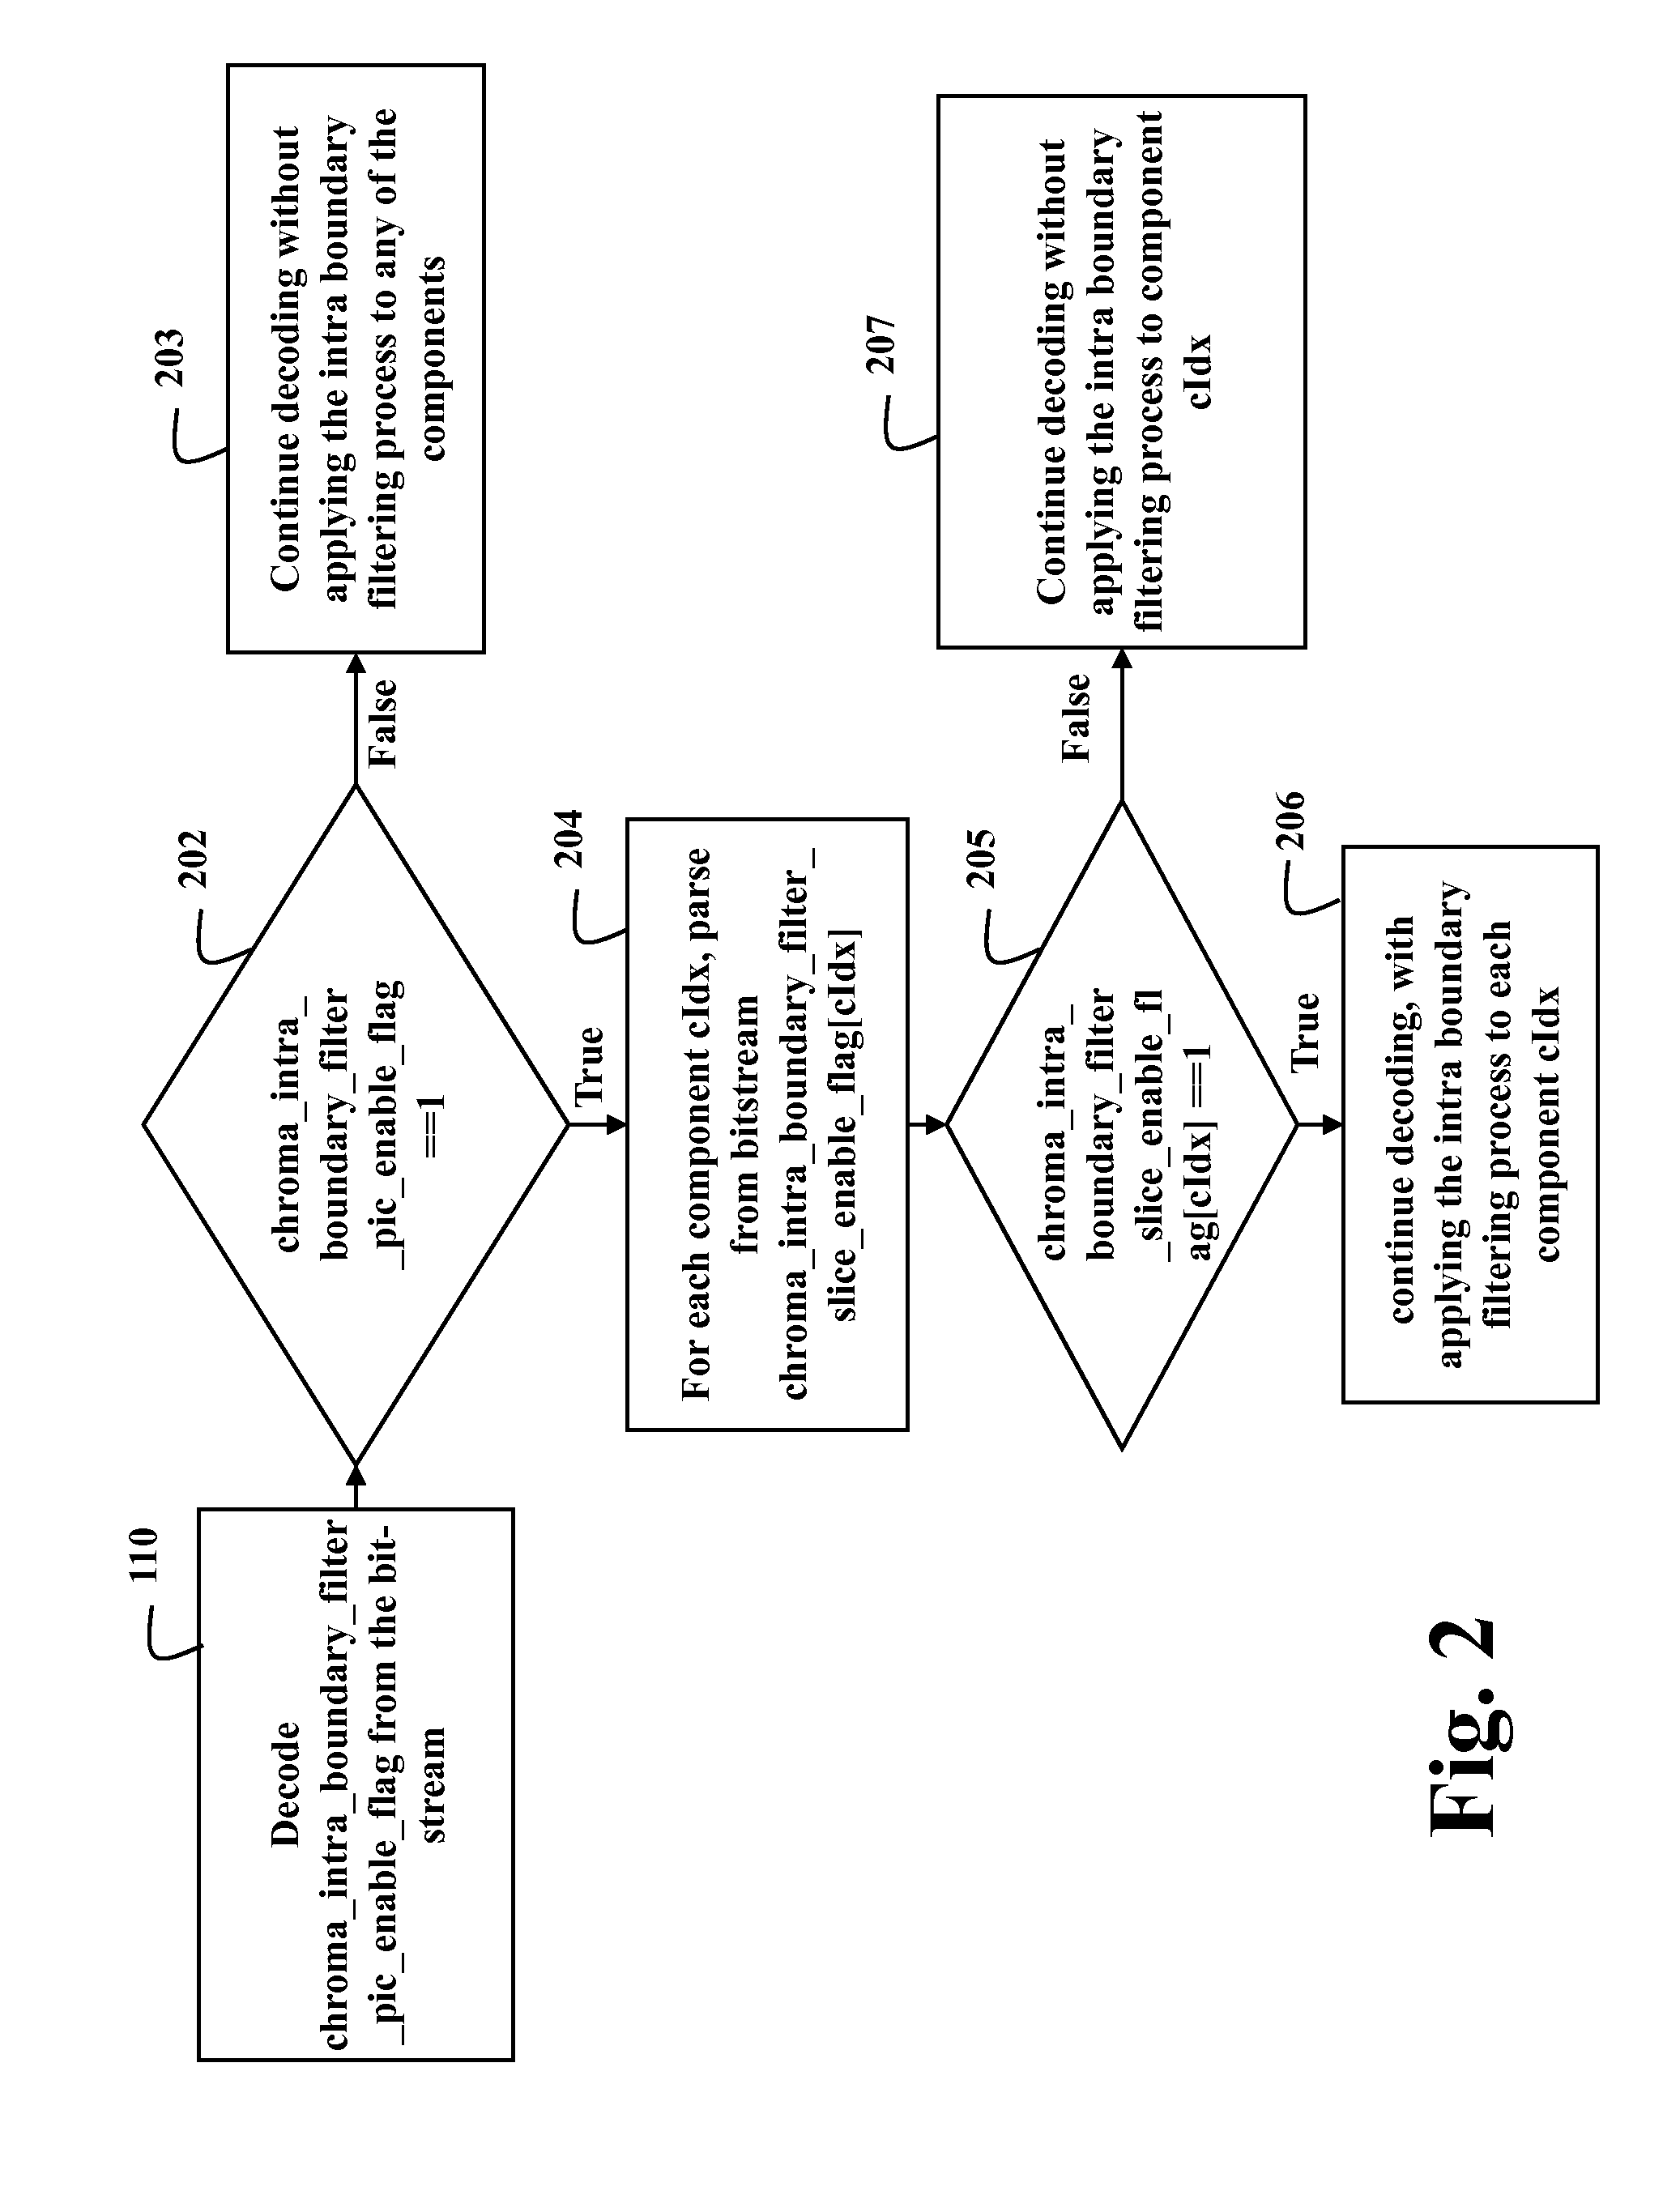 Method for Processing Multi-Component Video and Images